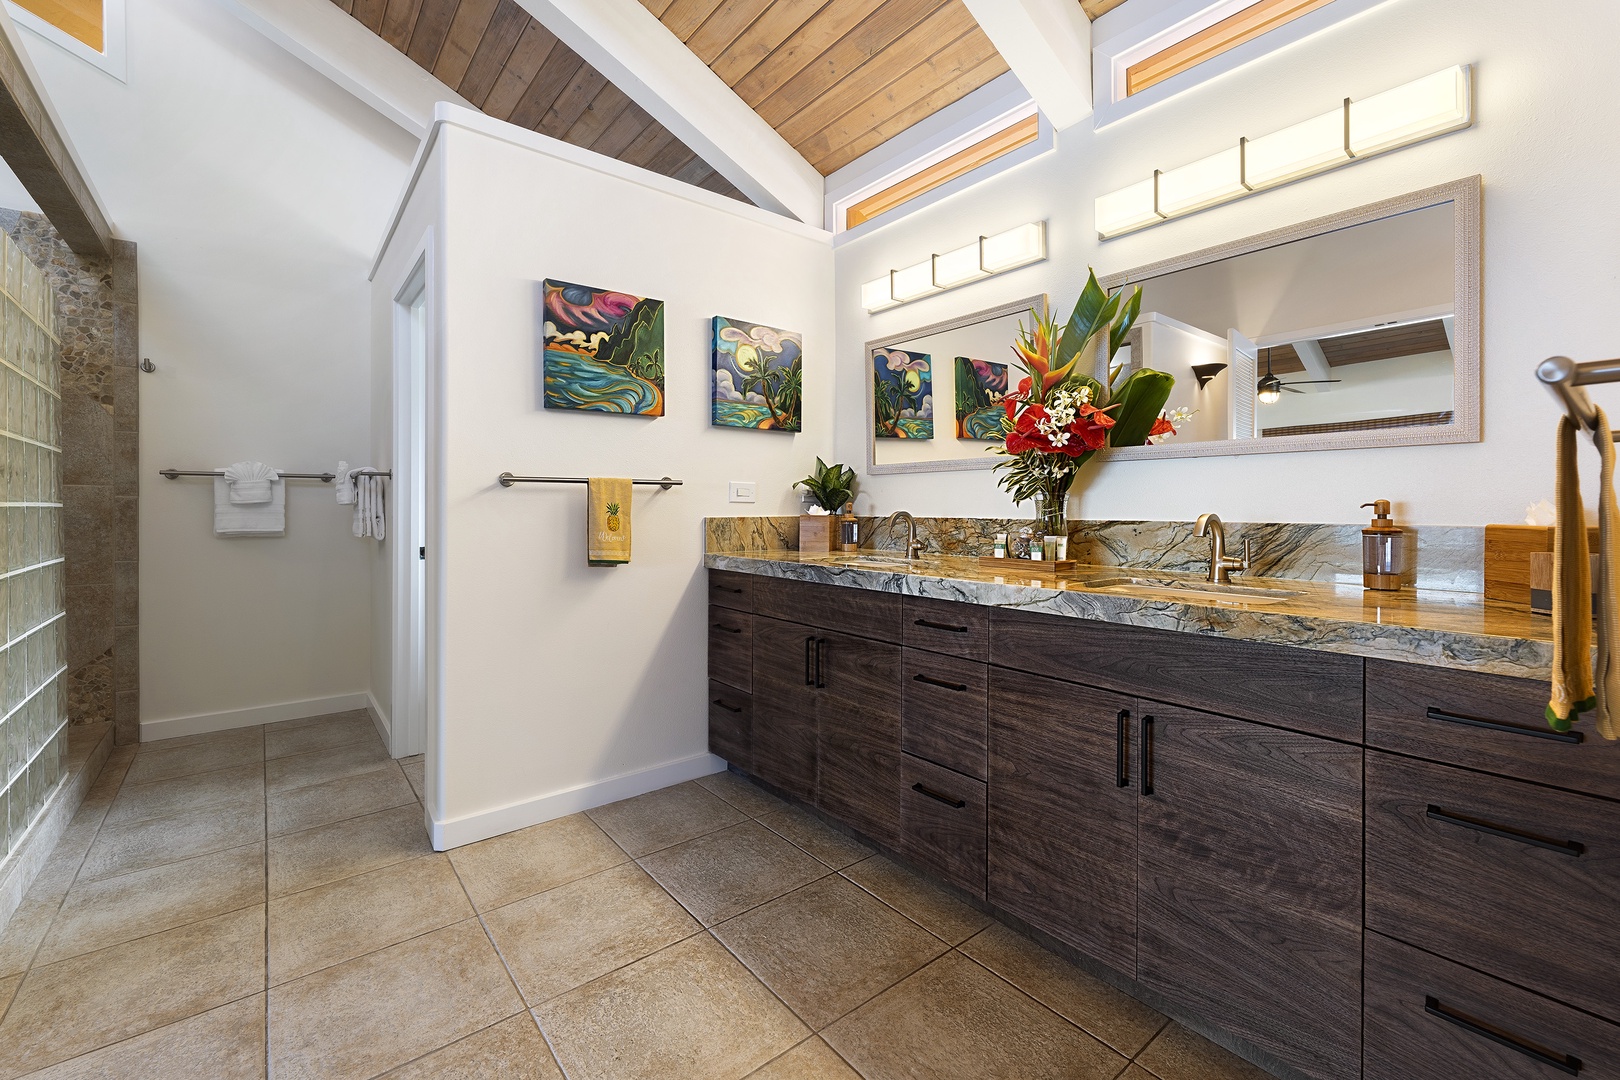 Kailua Kona Vacation Rentals, Hale Pua - Primary Bathroom featuring A/C as well due to the vaulted ceilings